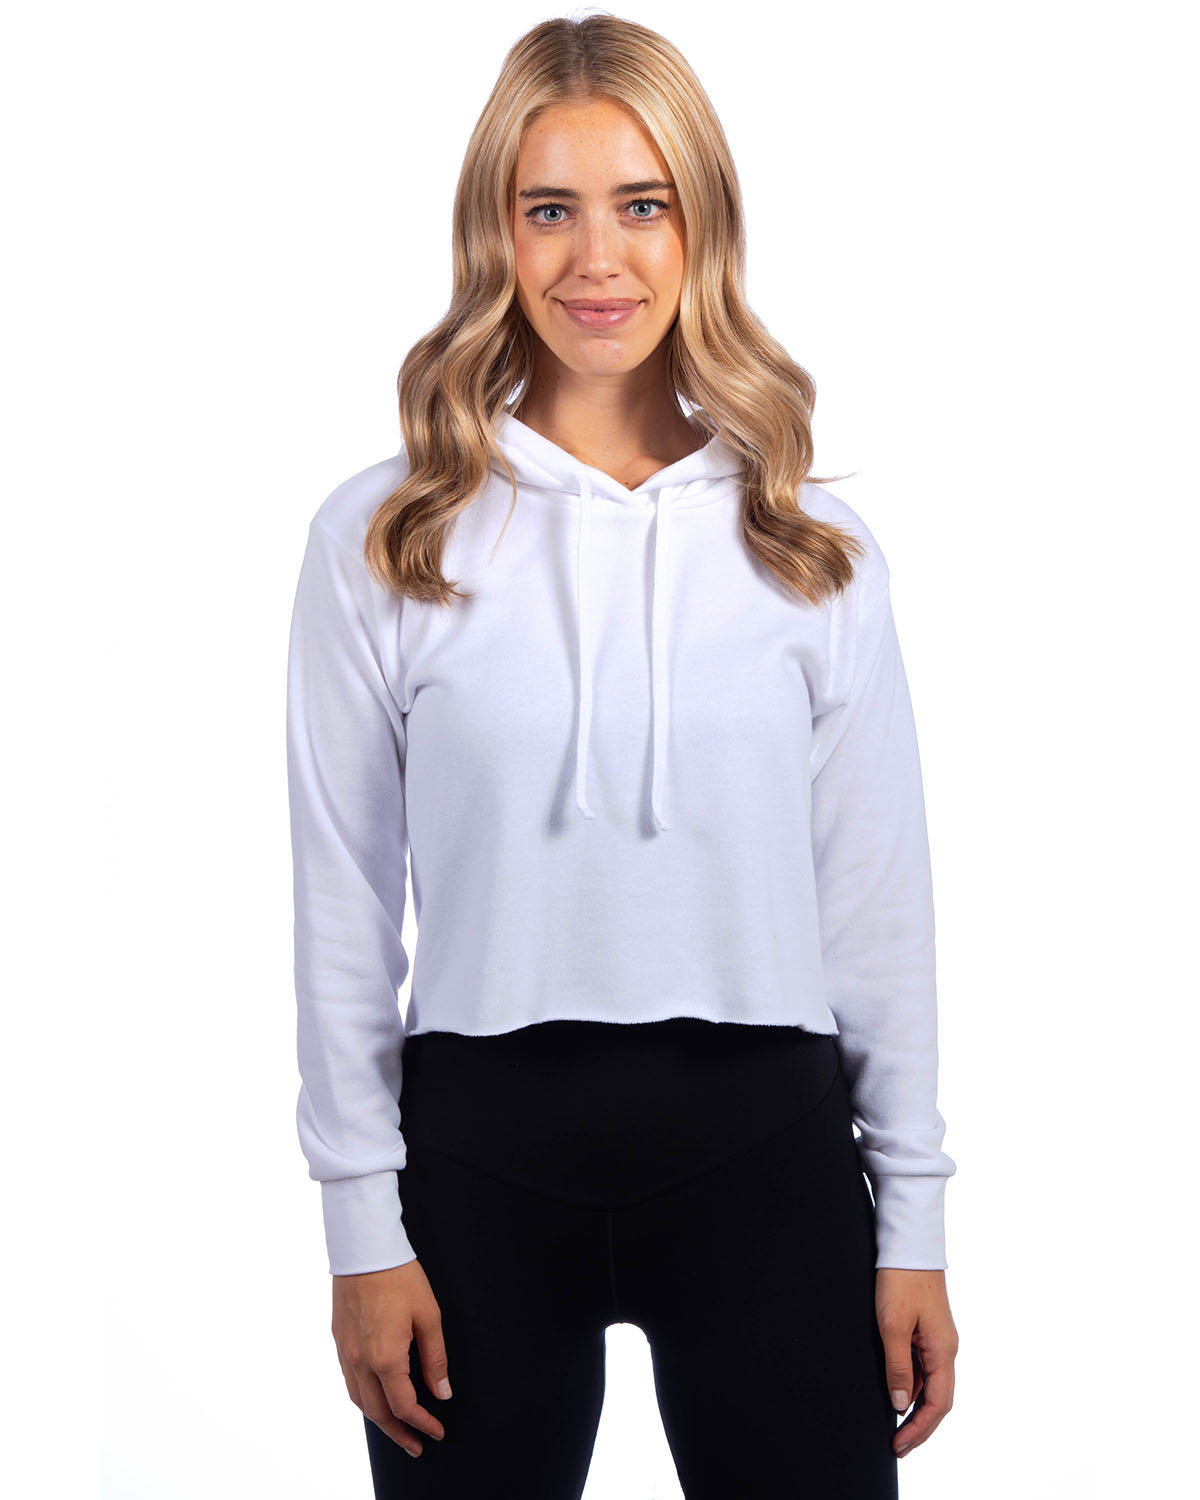 Next Level Ladies' Cropped Pullover Hooded Sweatshirt WHITE 